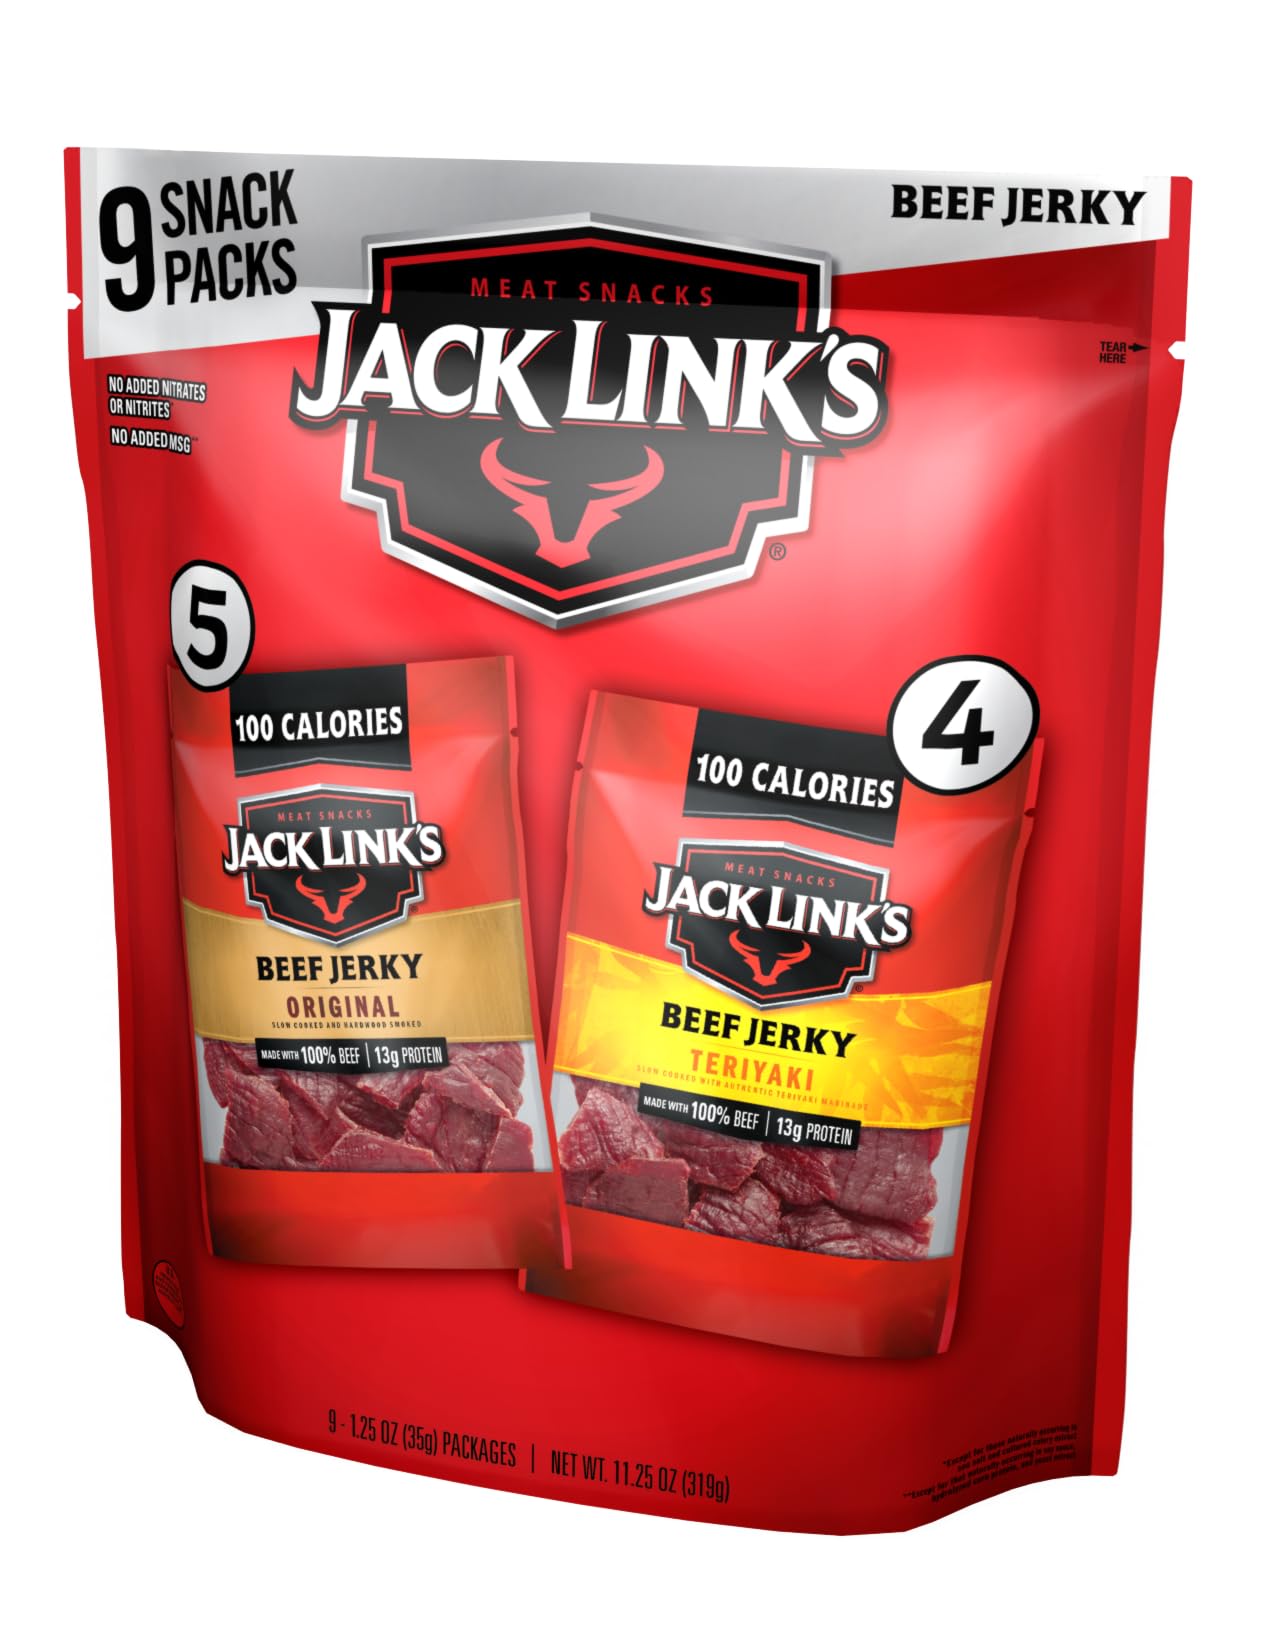 9-Count 1.25-Oz Jack Link's Beef Jerky Variety Pack On the Go Snacks (Original & Teriyaki) $10.20 ($1.14 Ea) w/ S&S + Free Shipping w/ Prime or on $35+